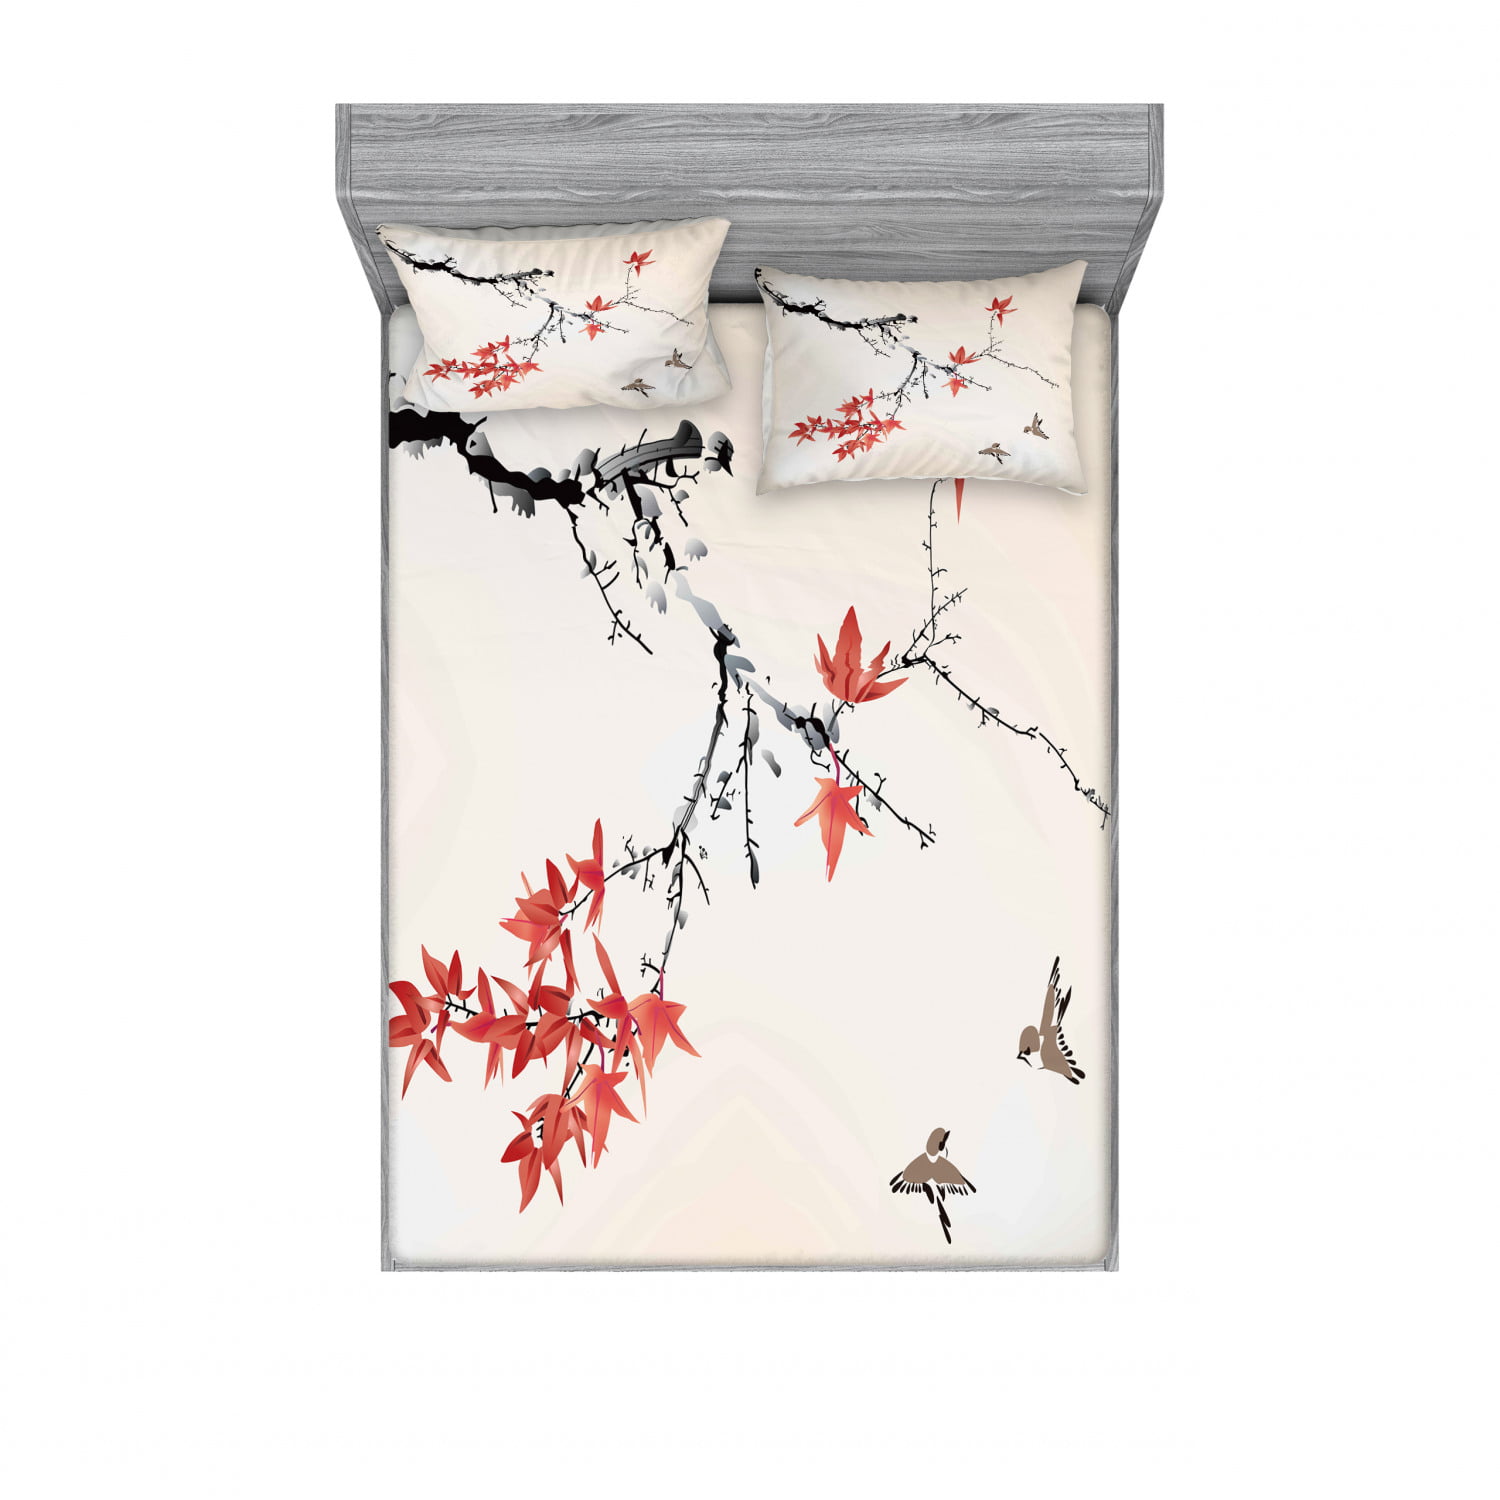 King Size Cherry Blossom Sakura Tree Branches Romantic Spring Themed Watercolor Picture Ambesonne Japanese Flat Sheet Coral Black Soft Comfortable Top Sheet Decorative Bedding 1 Piece